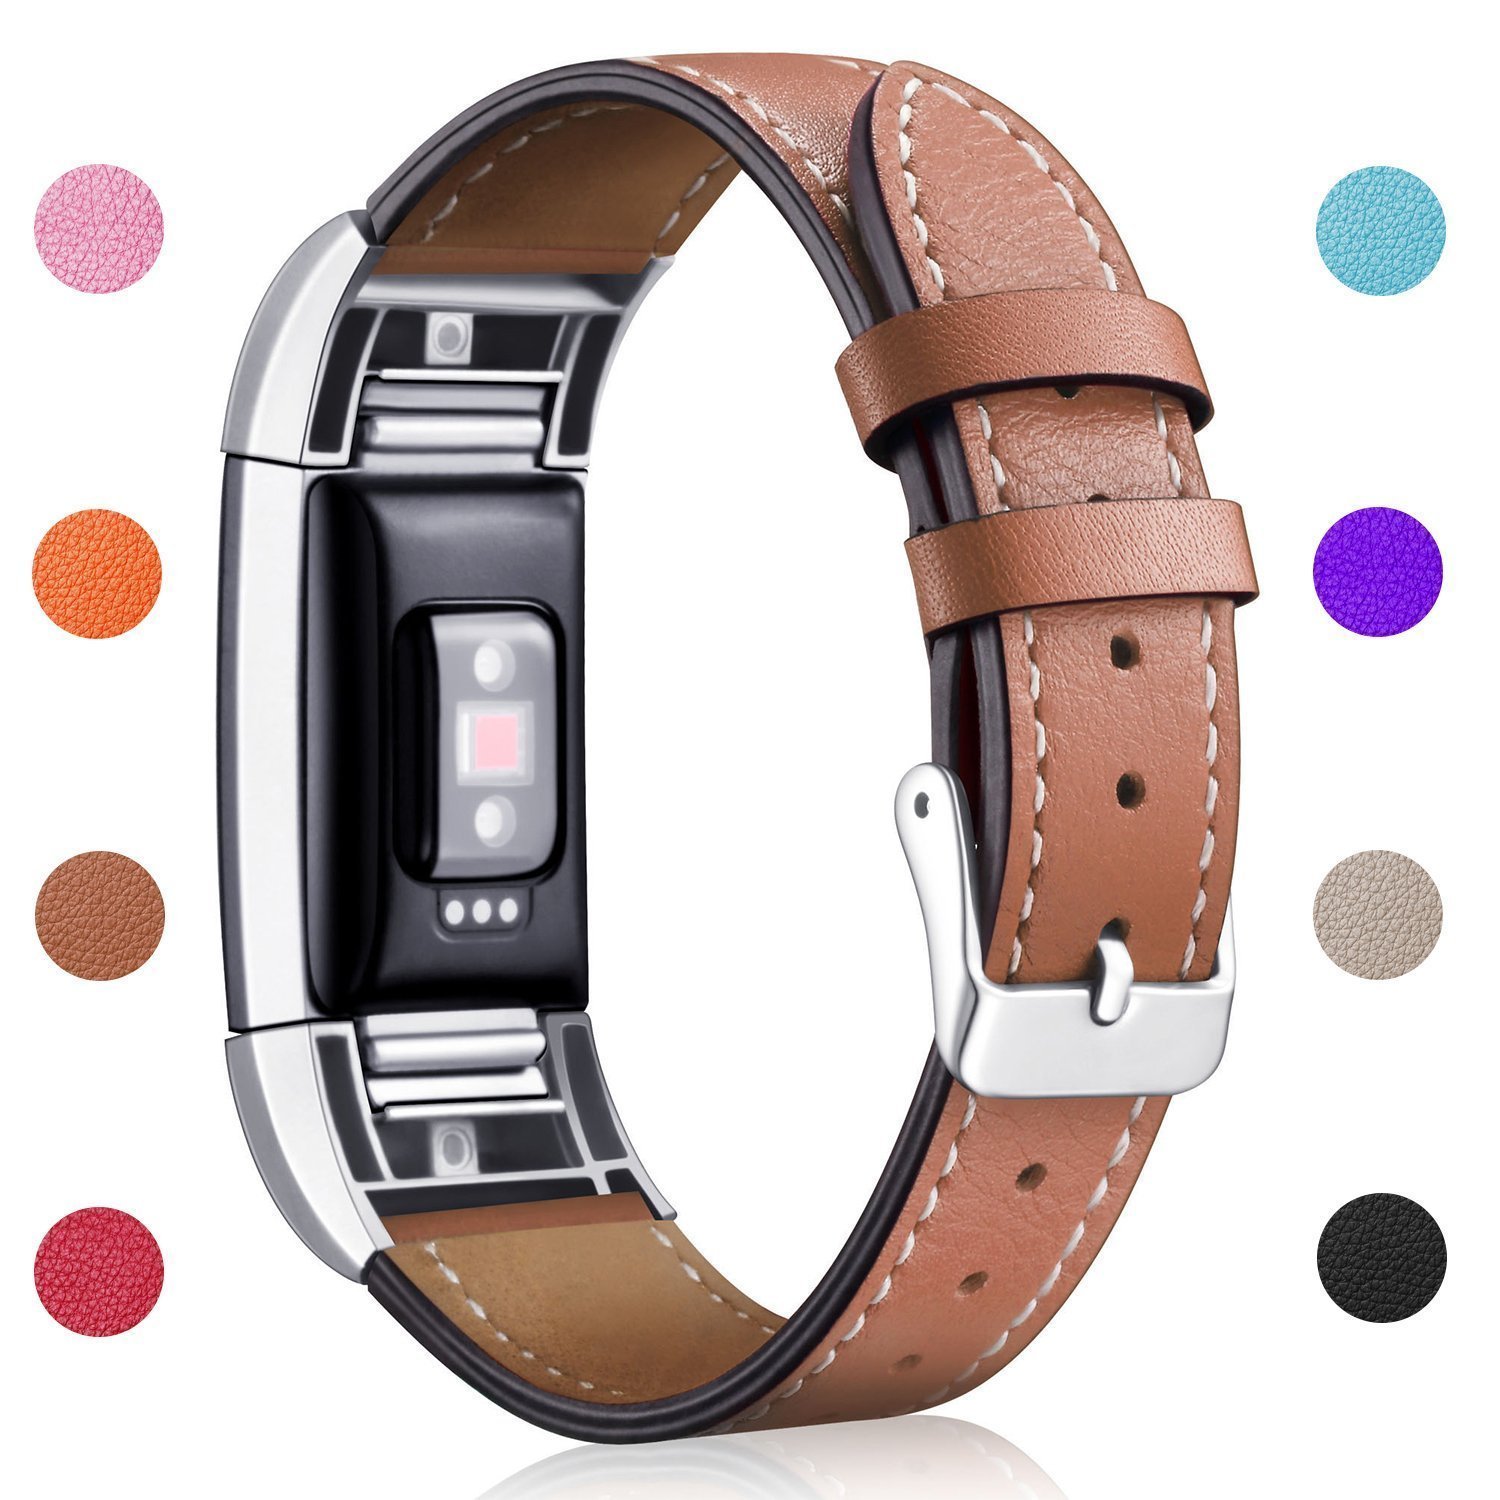 Fitbit Charge 2 Classic Genuine Leather Wristband With Metal Connectors